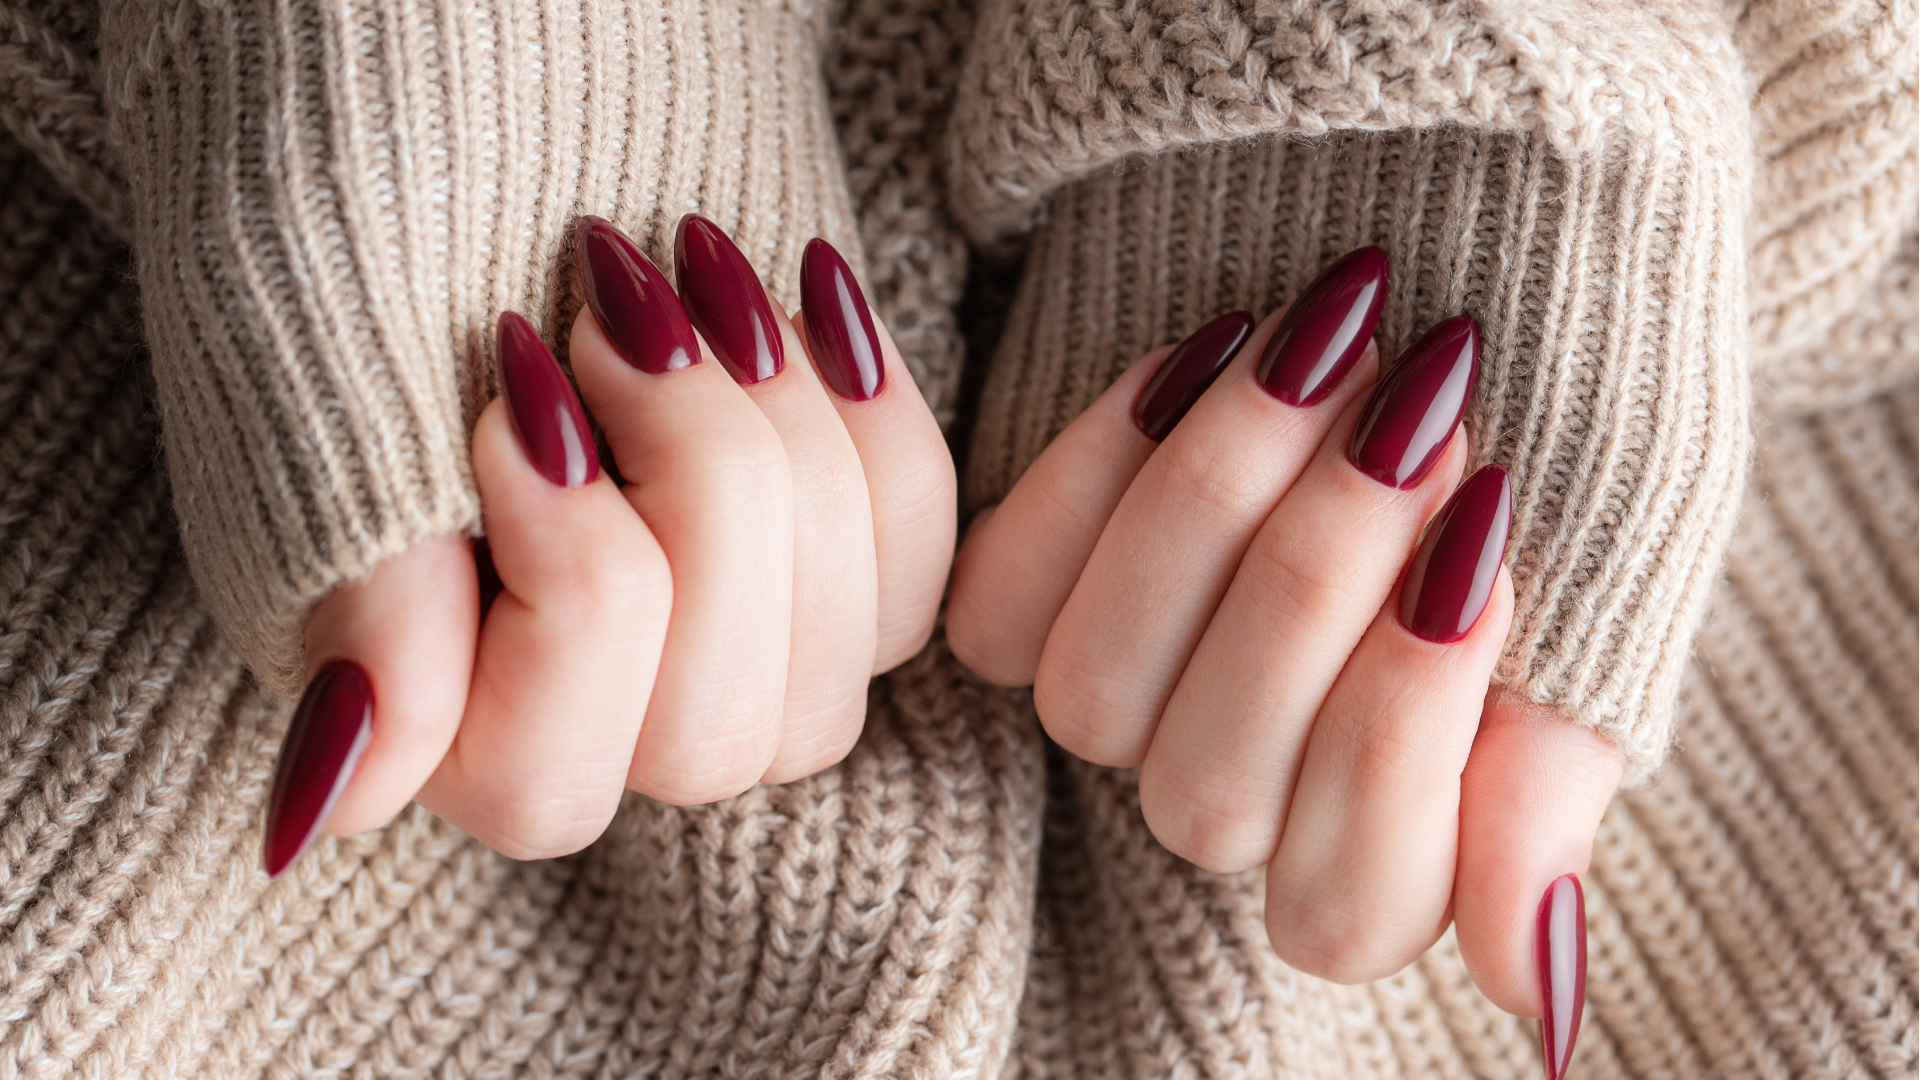 9 Fall Nail Trends to Inspire Your Next Manicure - Fashionista